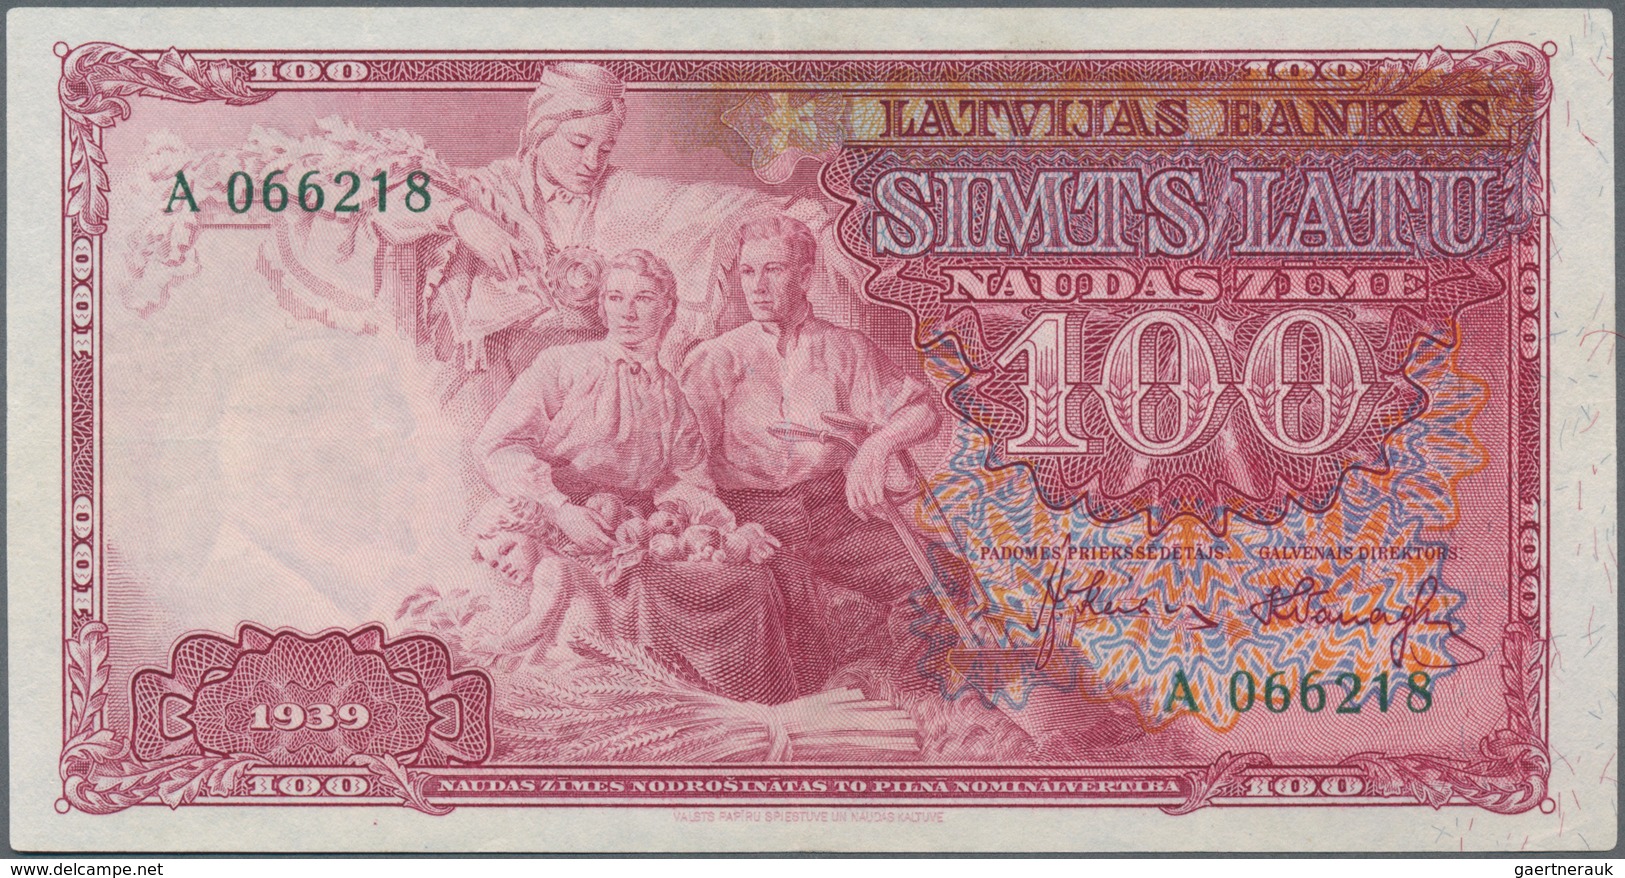 Alle Welt: Very interesting lot with 10 banknotes comprising Mauritius 5 Rupees ND(1954) P.27 (PMG 3